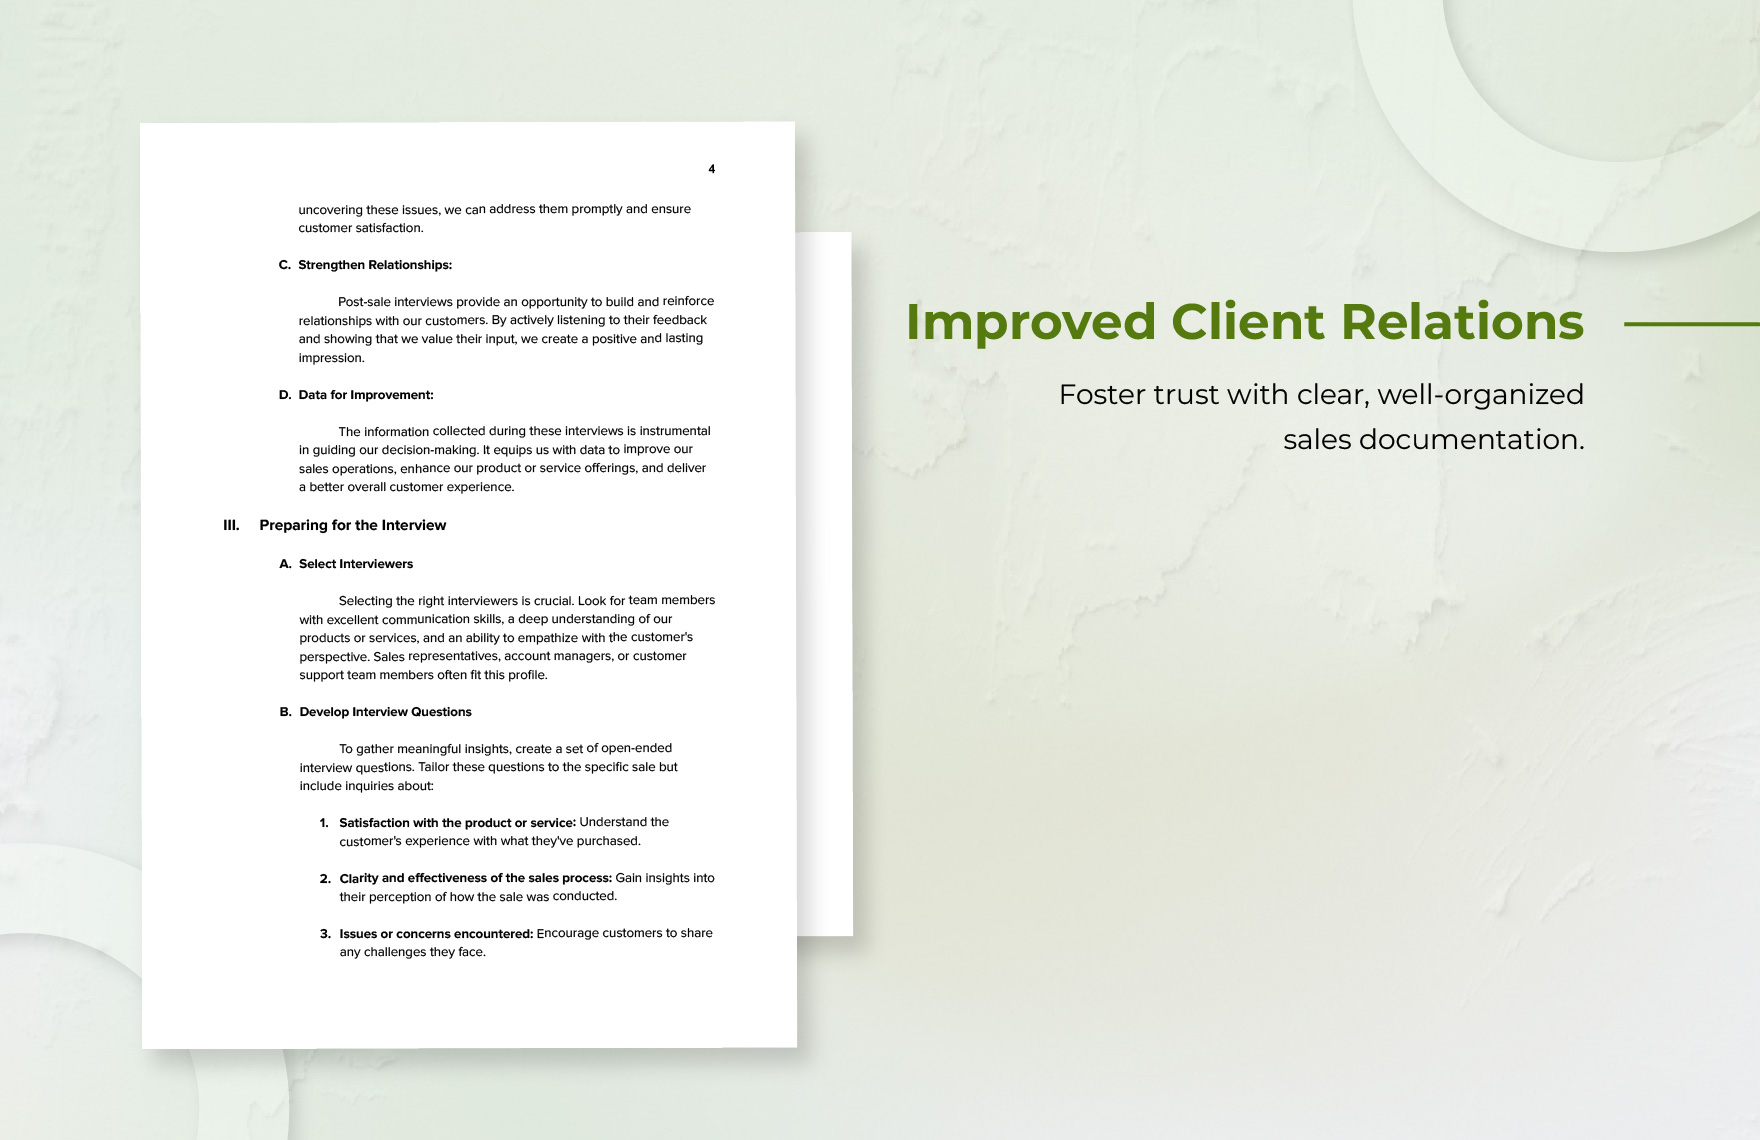 Guide for Conducting Post-Sale Customer Interviews Template